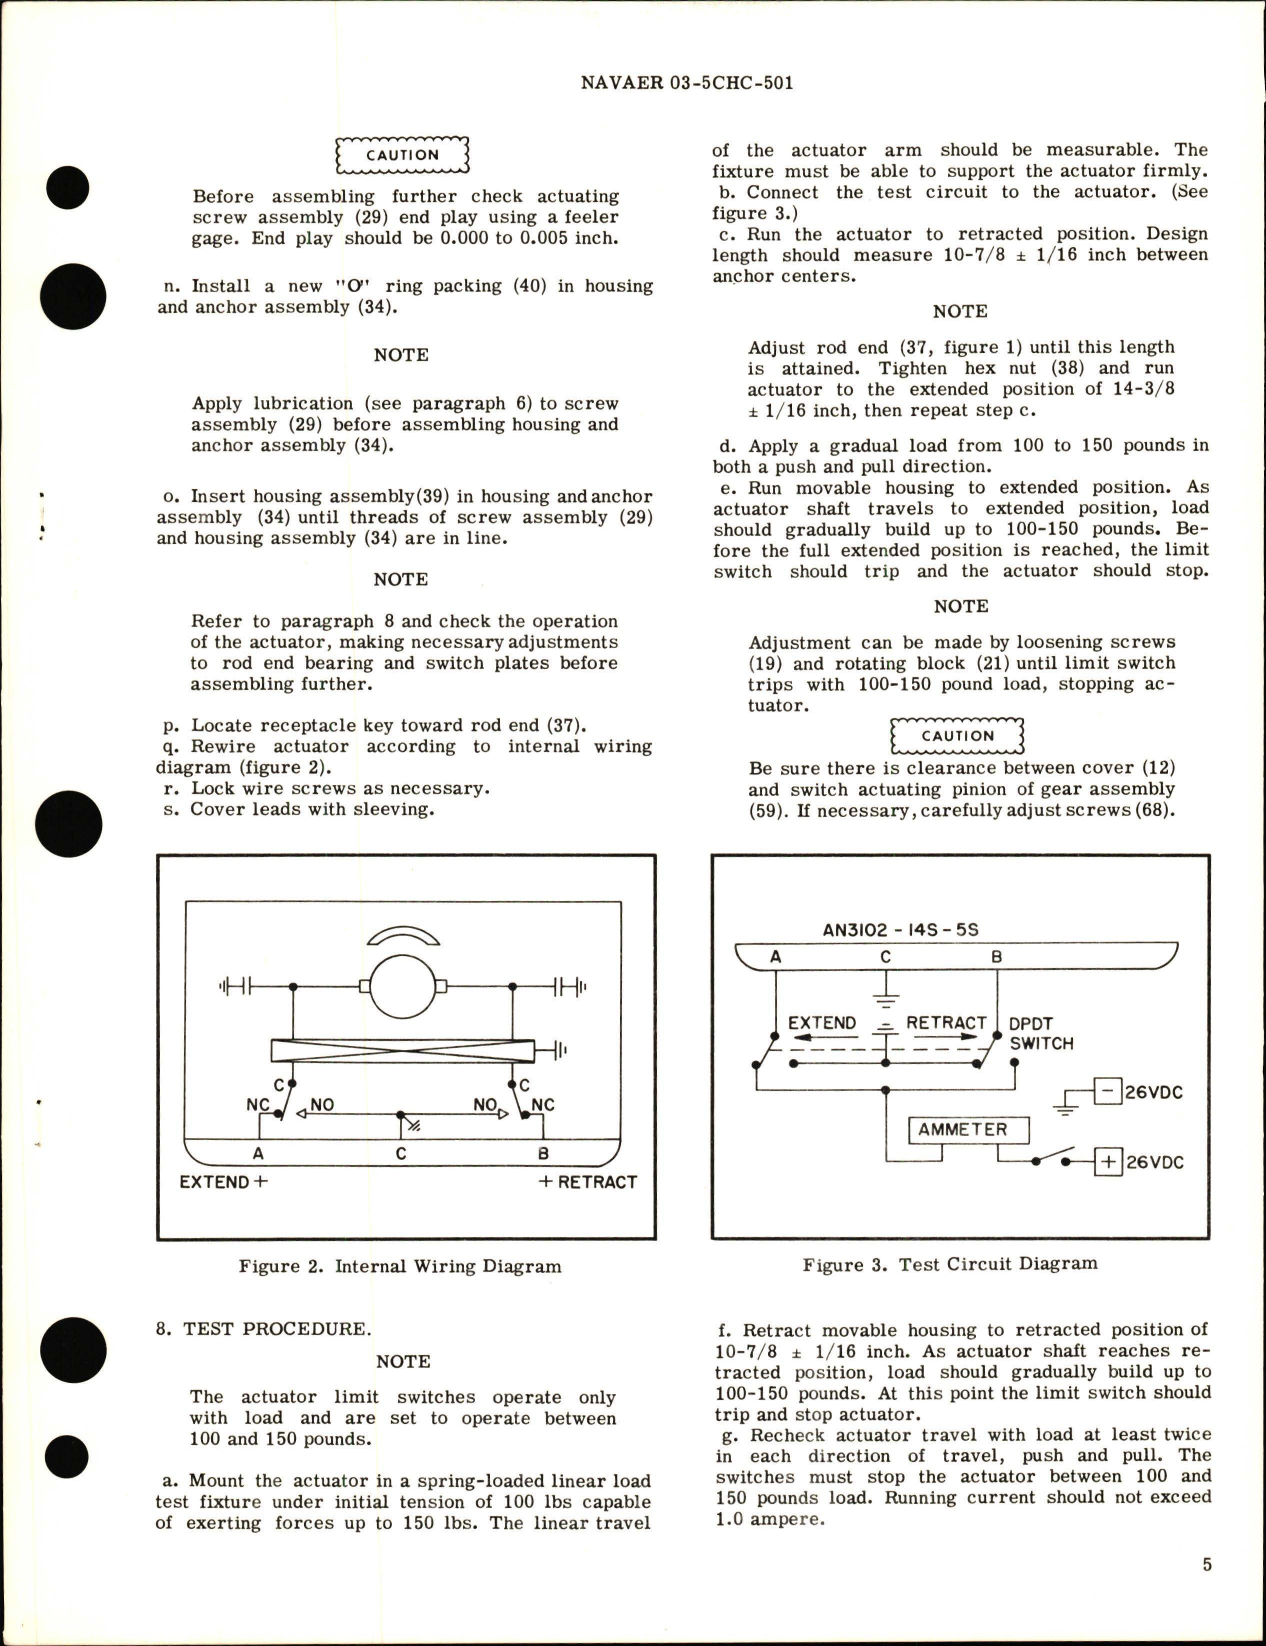 Sample page 5 from AirCorps Library document: Overhaul Instructions with Parts Breakdown for Linear Electromechanical Actuator - JYLC 3670-3A 